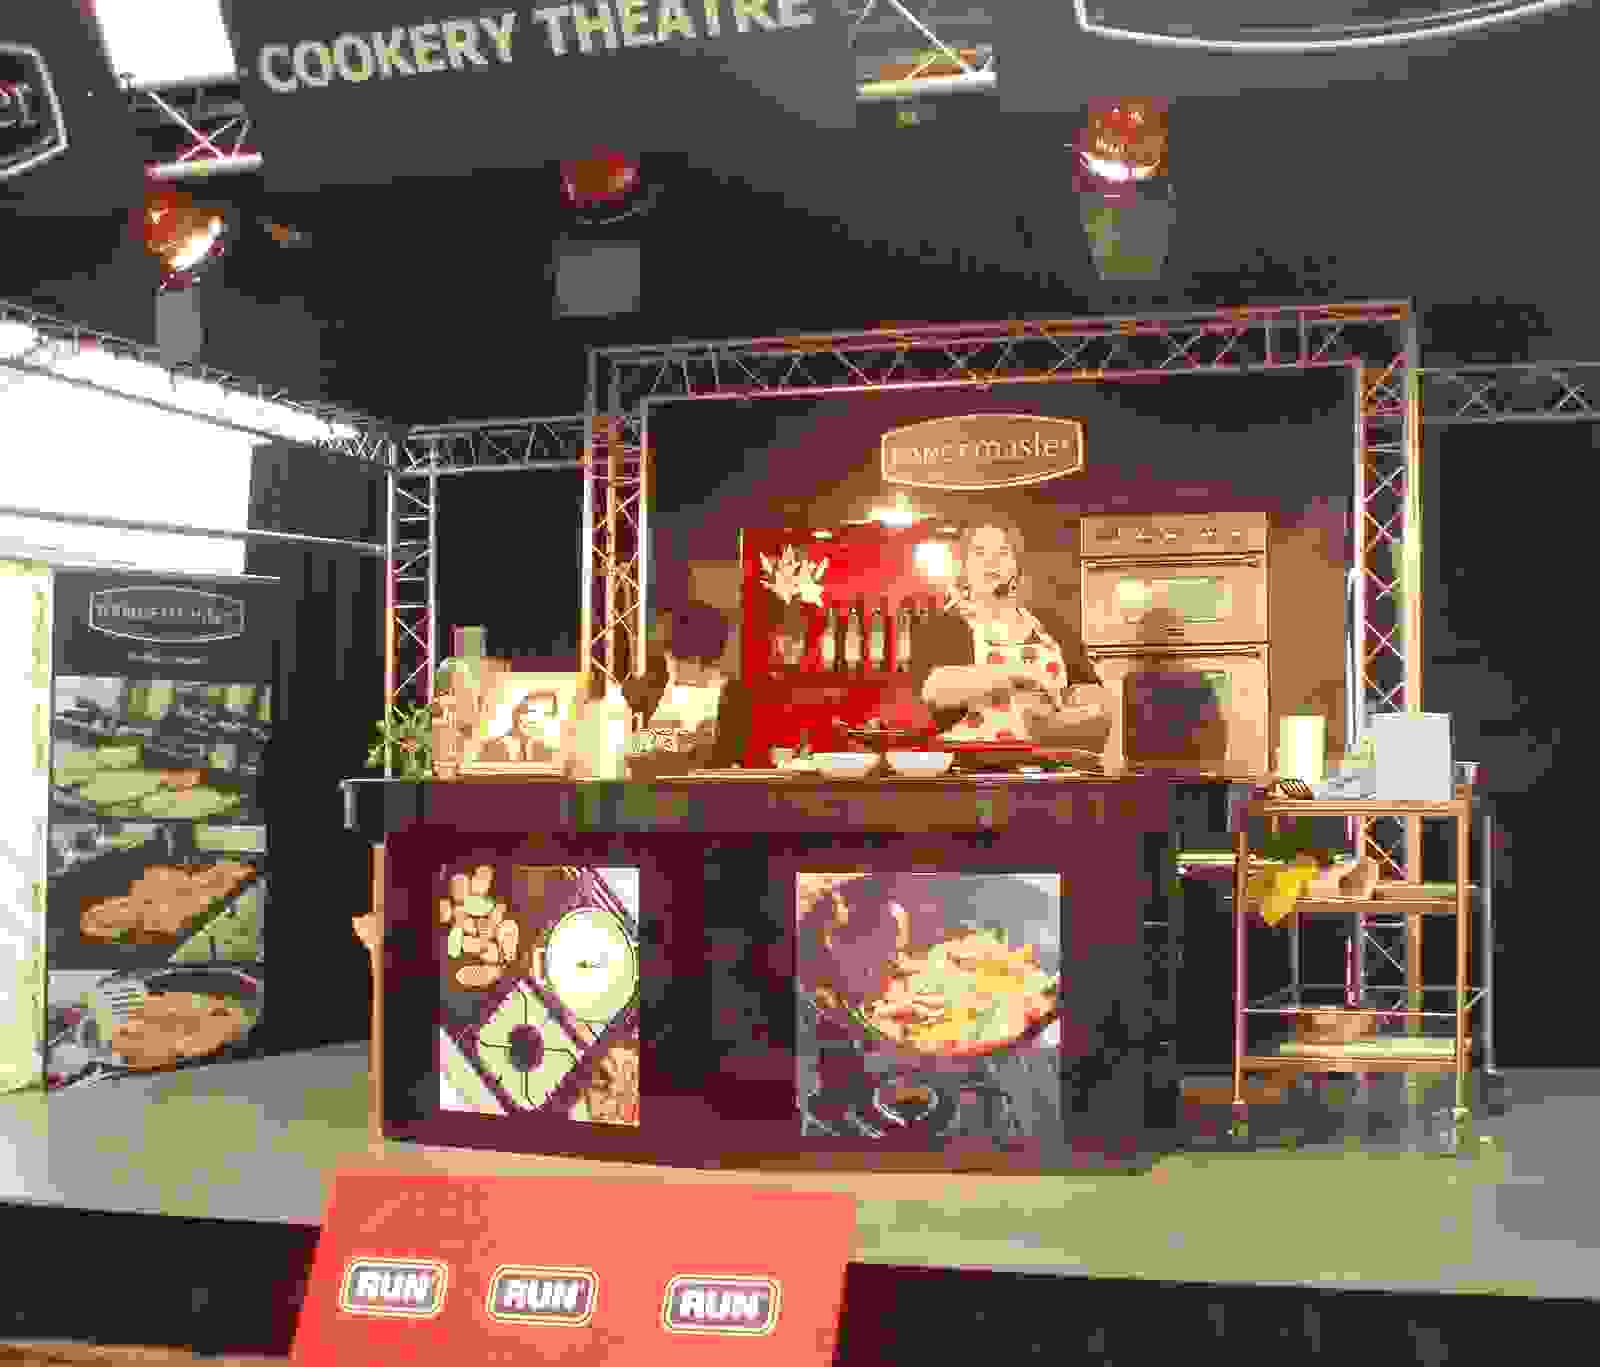 Cookery Theatre On-stage